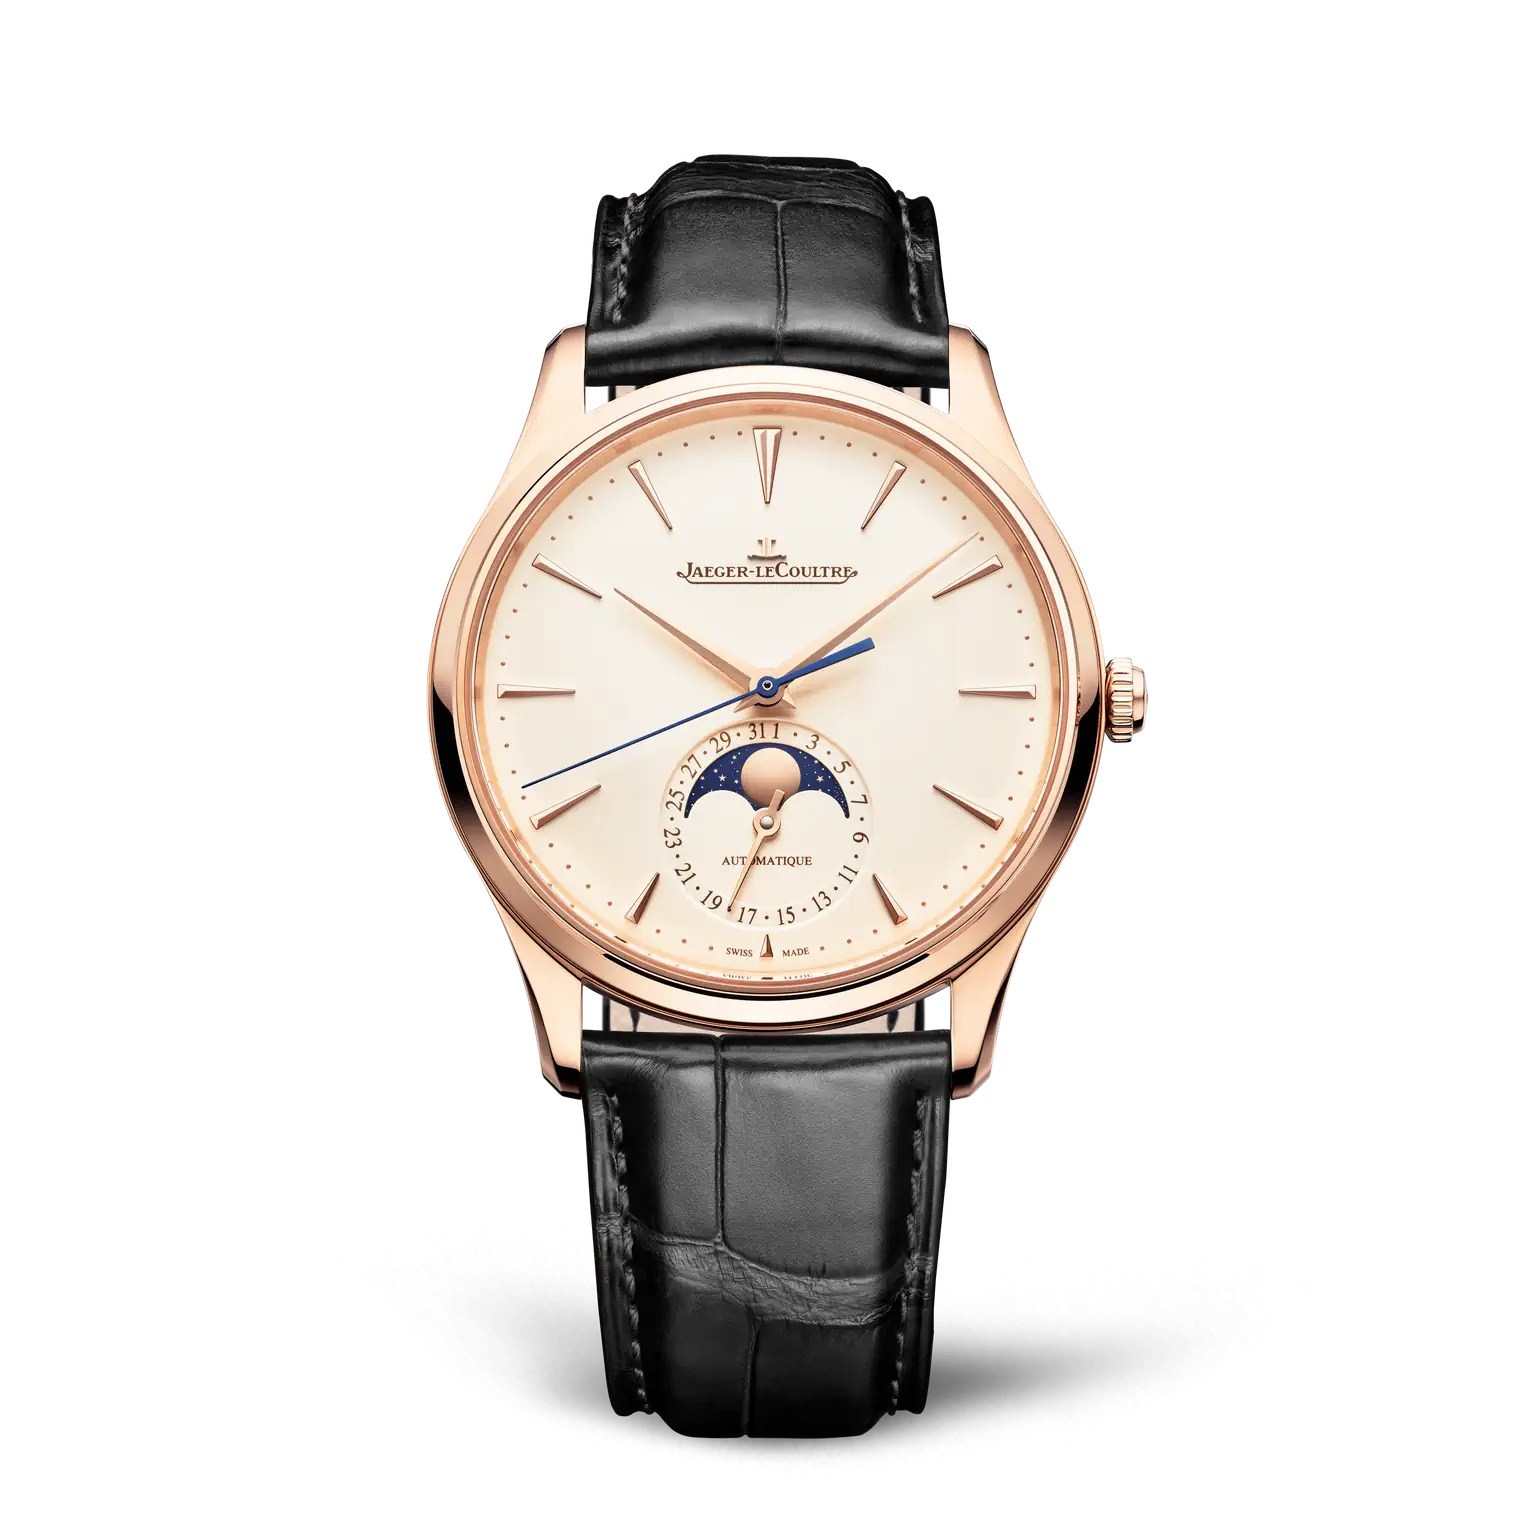 Jaeger-LeCoultre Master Ultra Thin Moon 39mm|Reference Q1362511